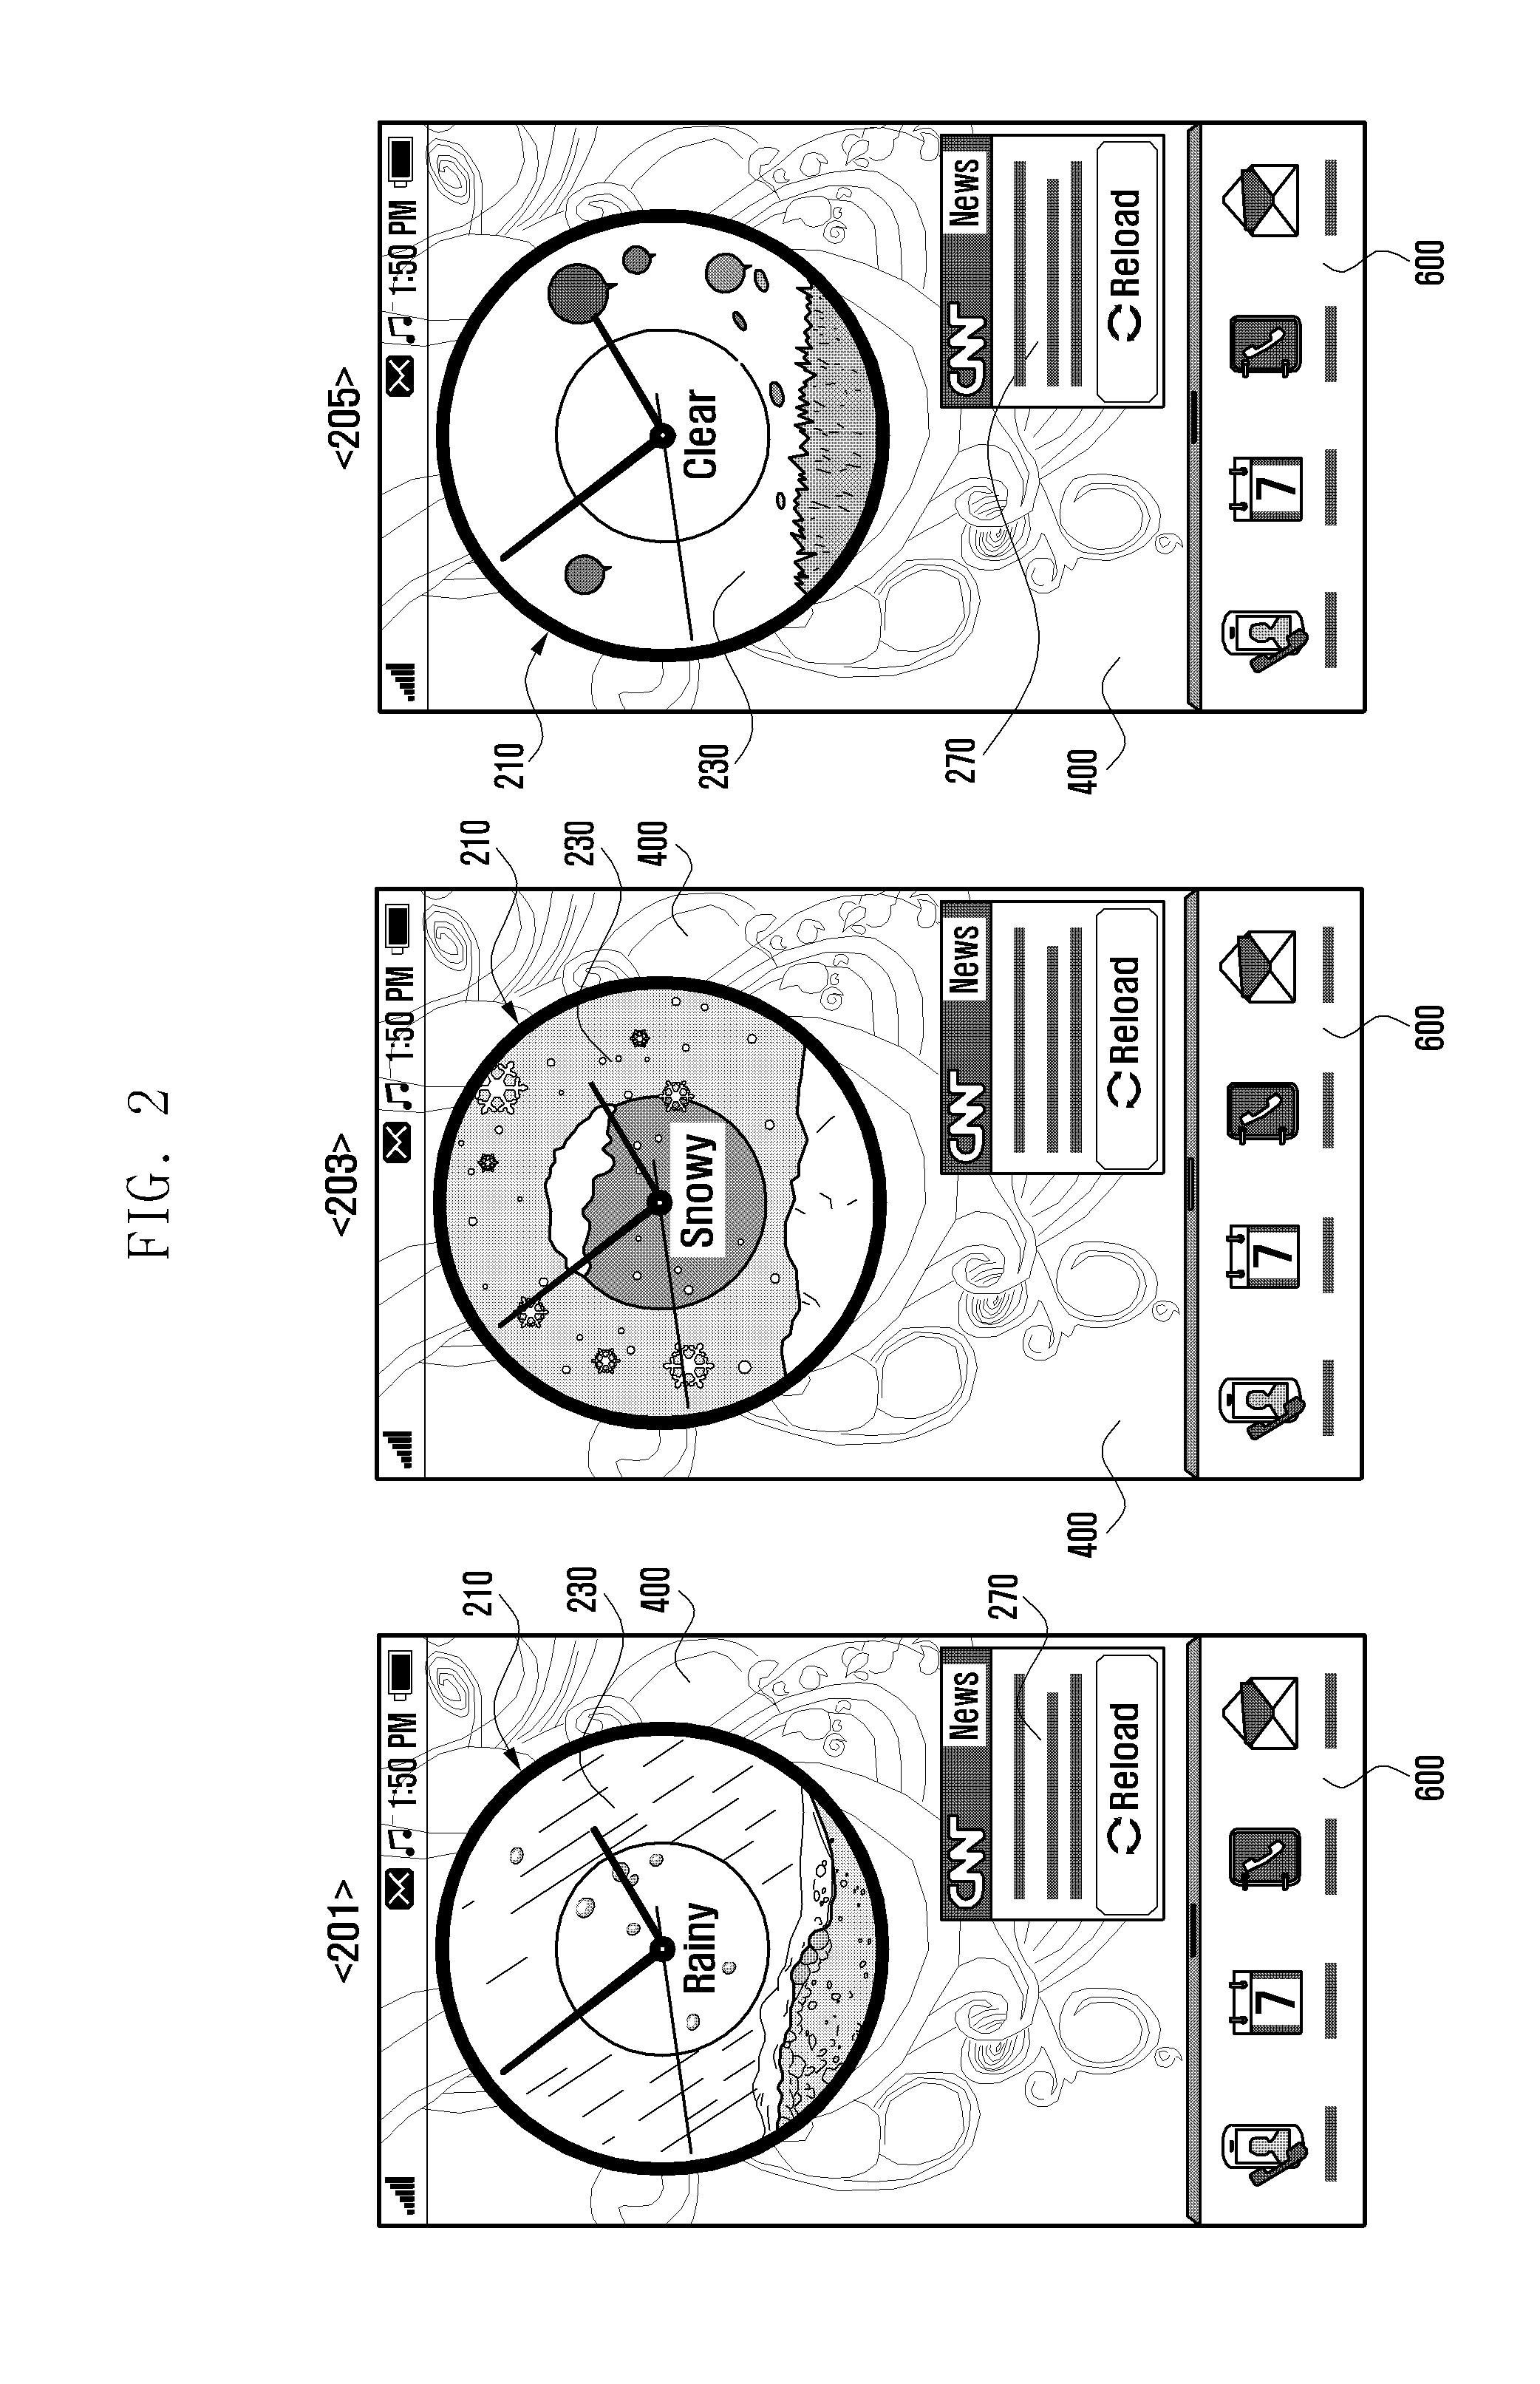 Method and apparatus for providing history of information associated to time information